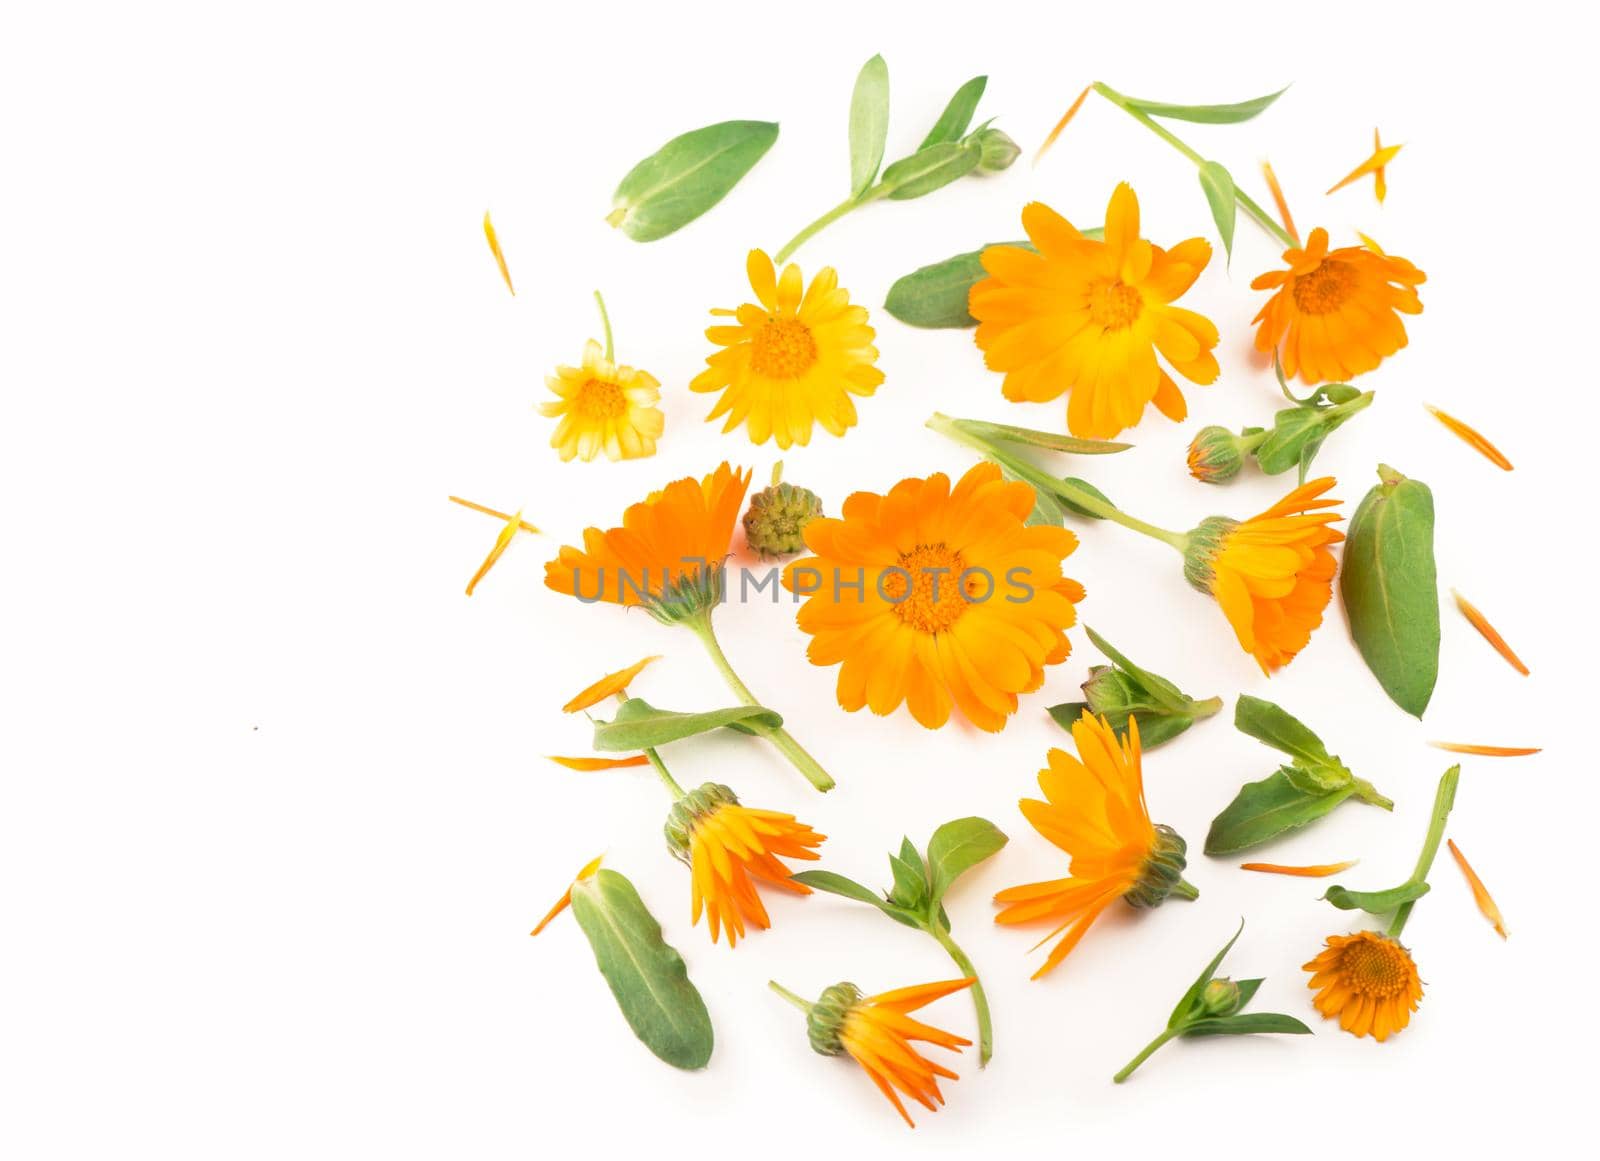 Calendula. Marigold flower isolated on white background with copy space for your text. by aprilphoto